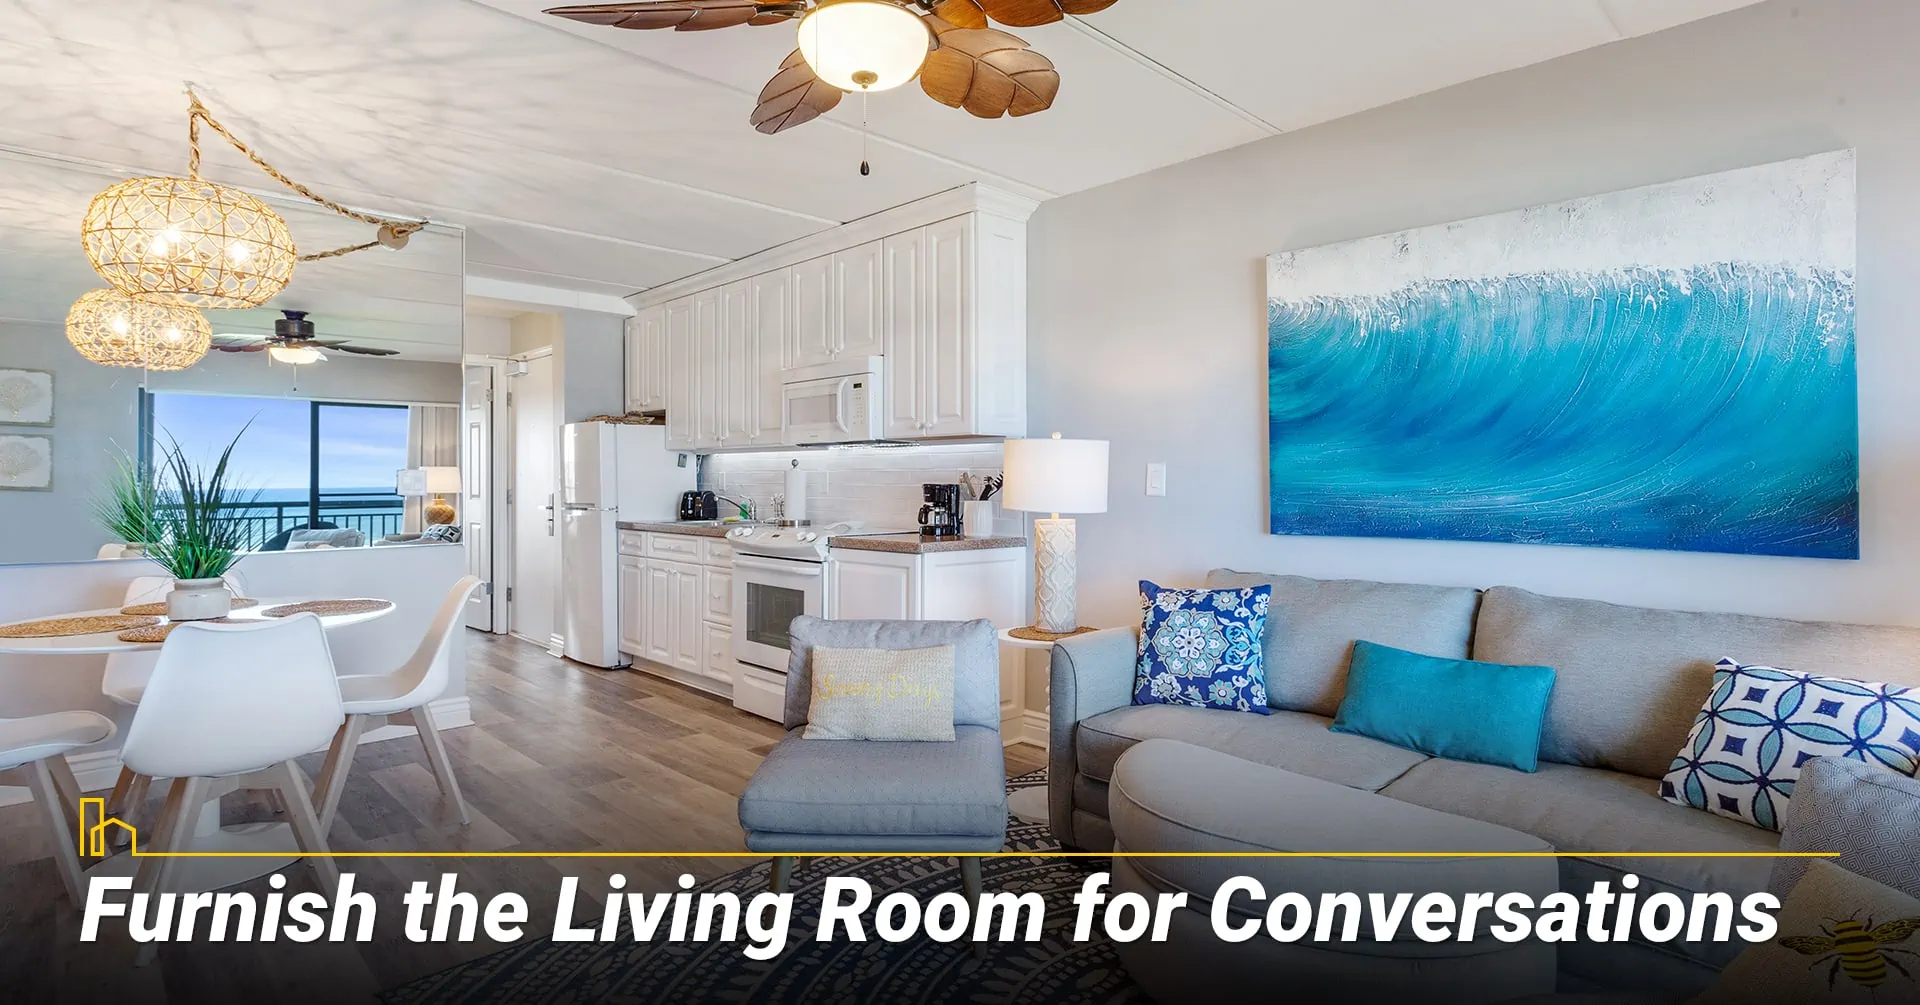 Furnish the Living Room for Conversations